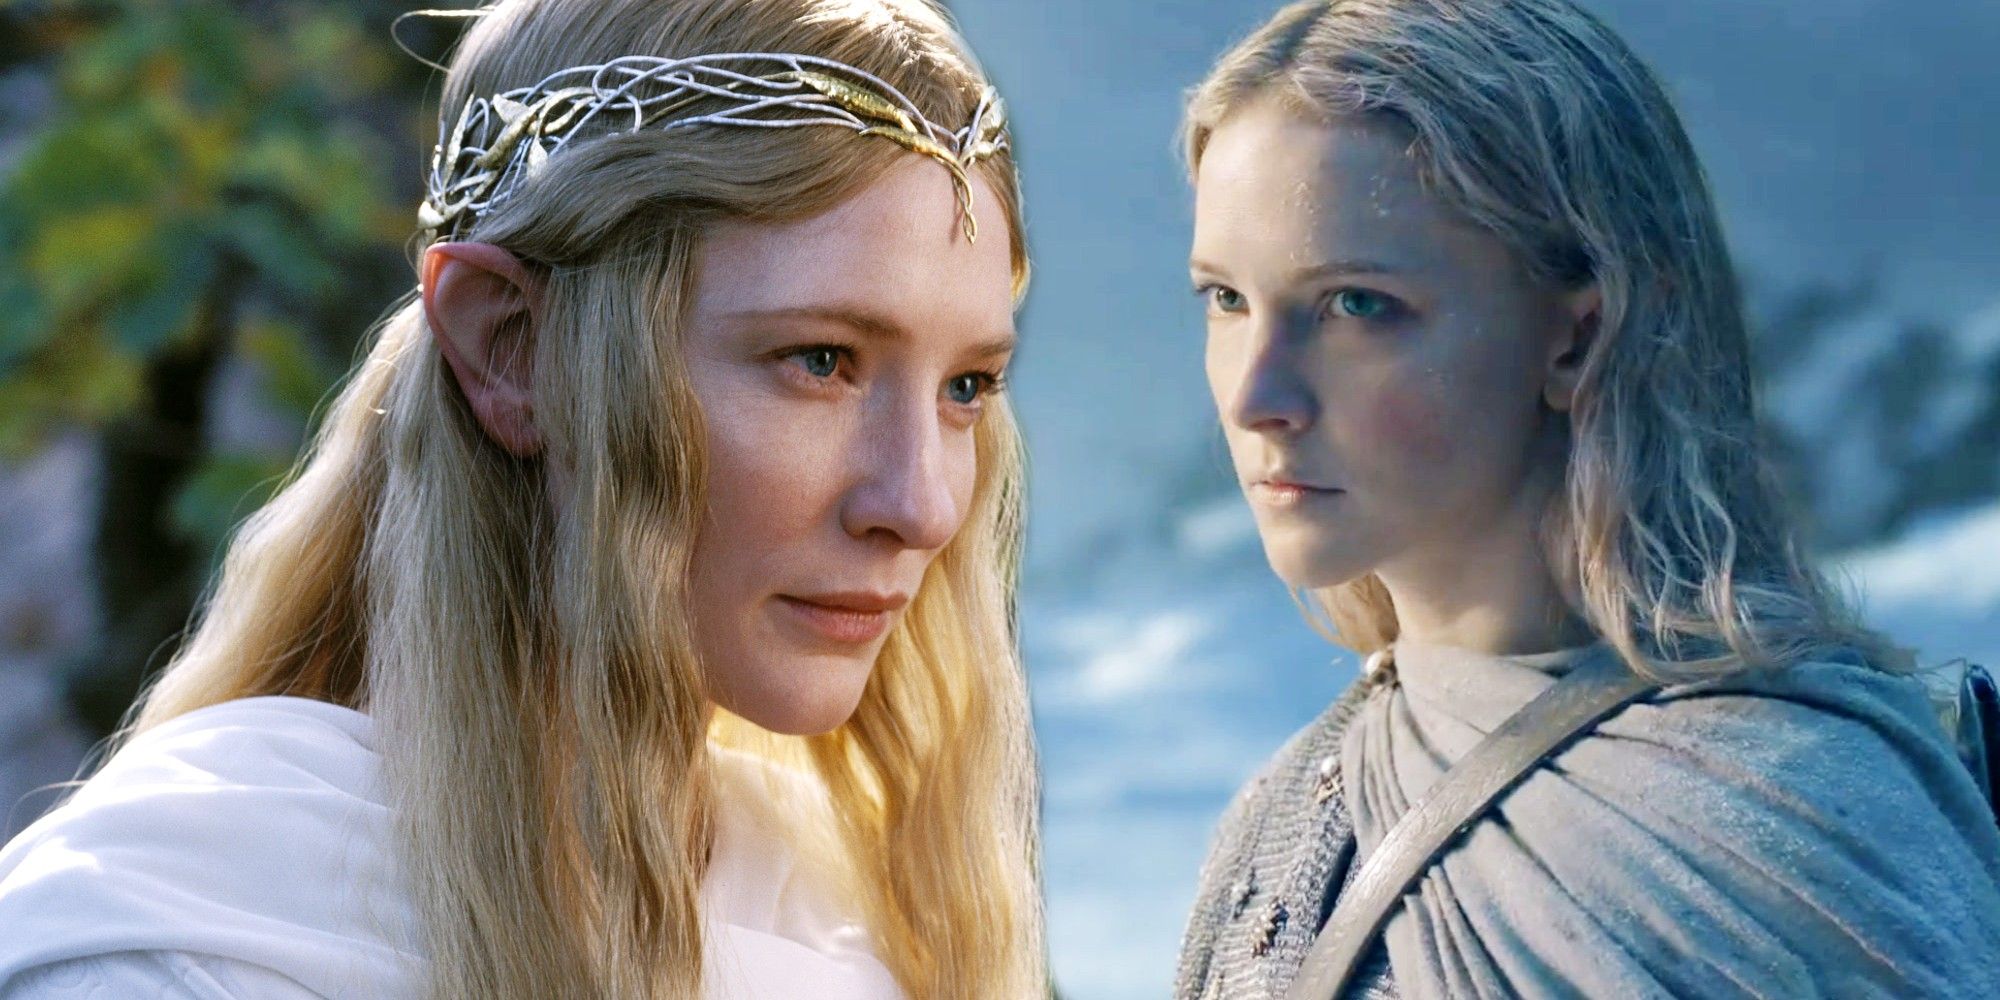 The Rings of Power's Sinister Queen Is Galadriel's Antithesis